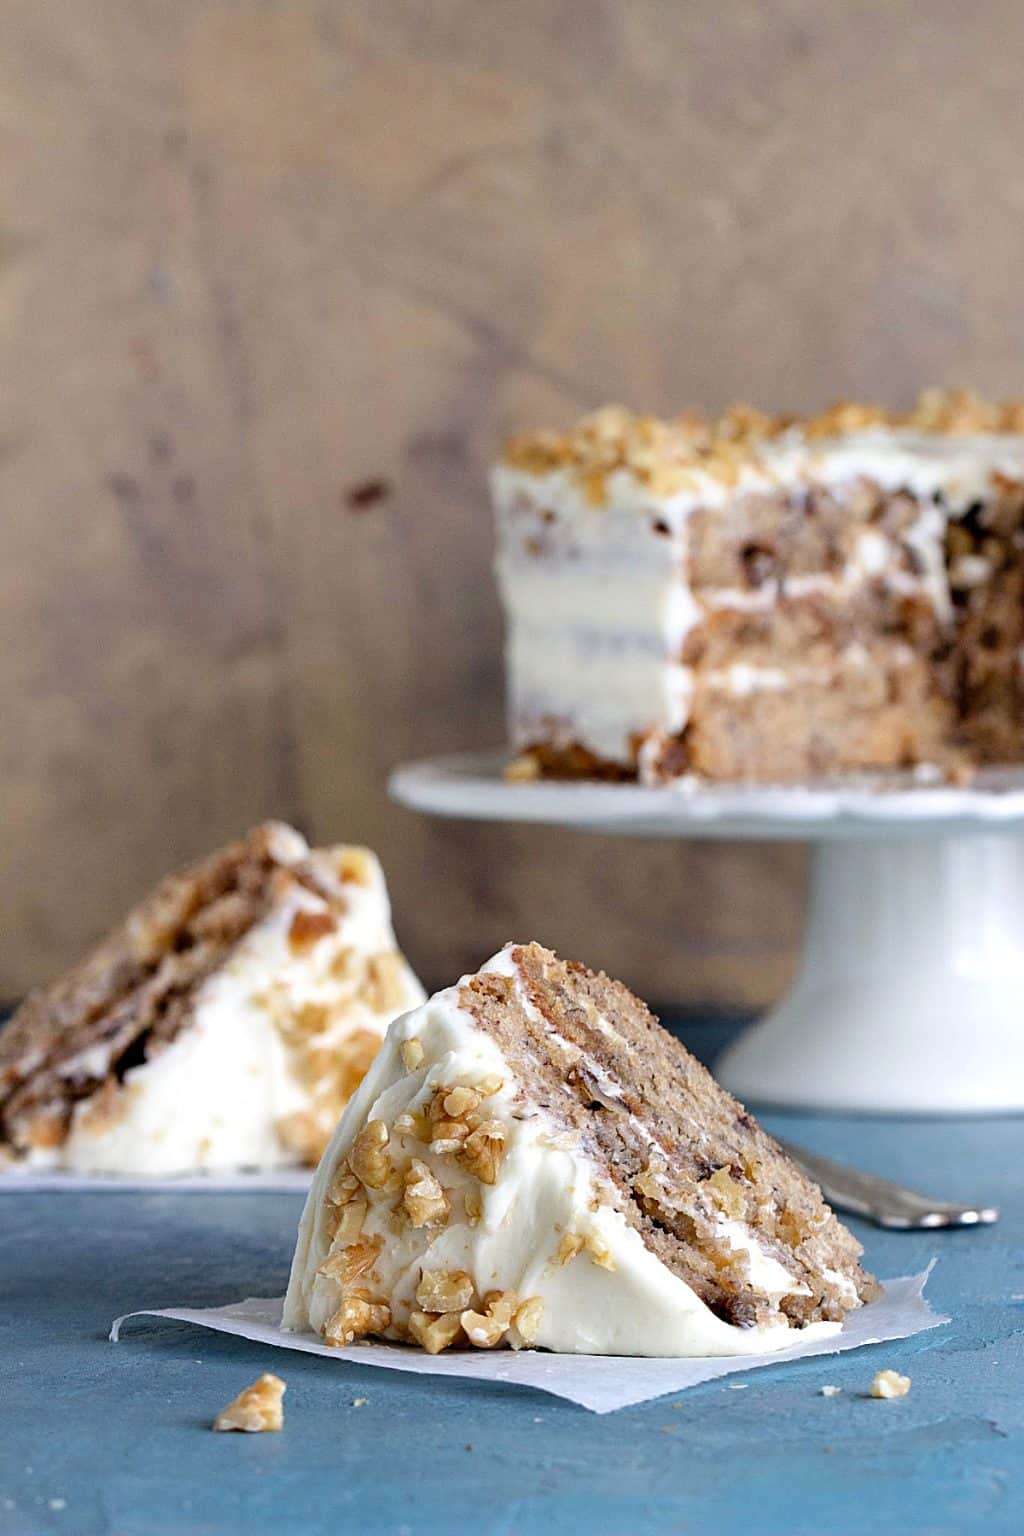 Hummingbird Cake Recipe (with cream cheese frosting) - Vintage Kitchen ...